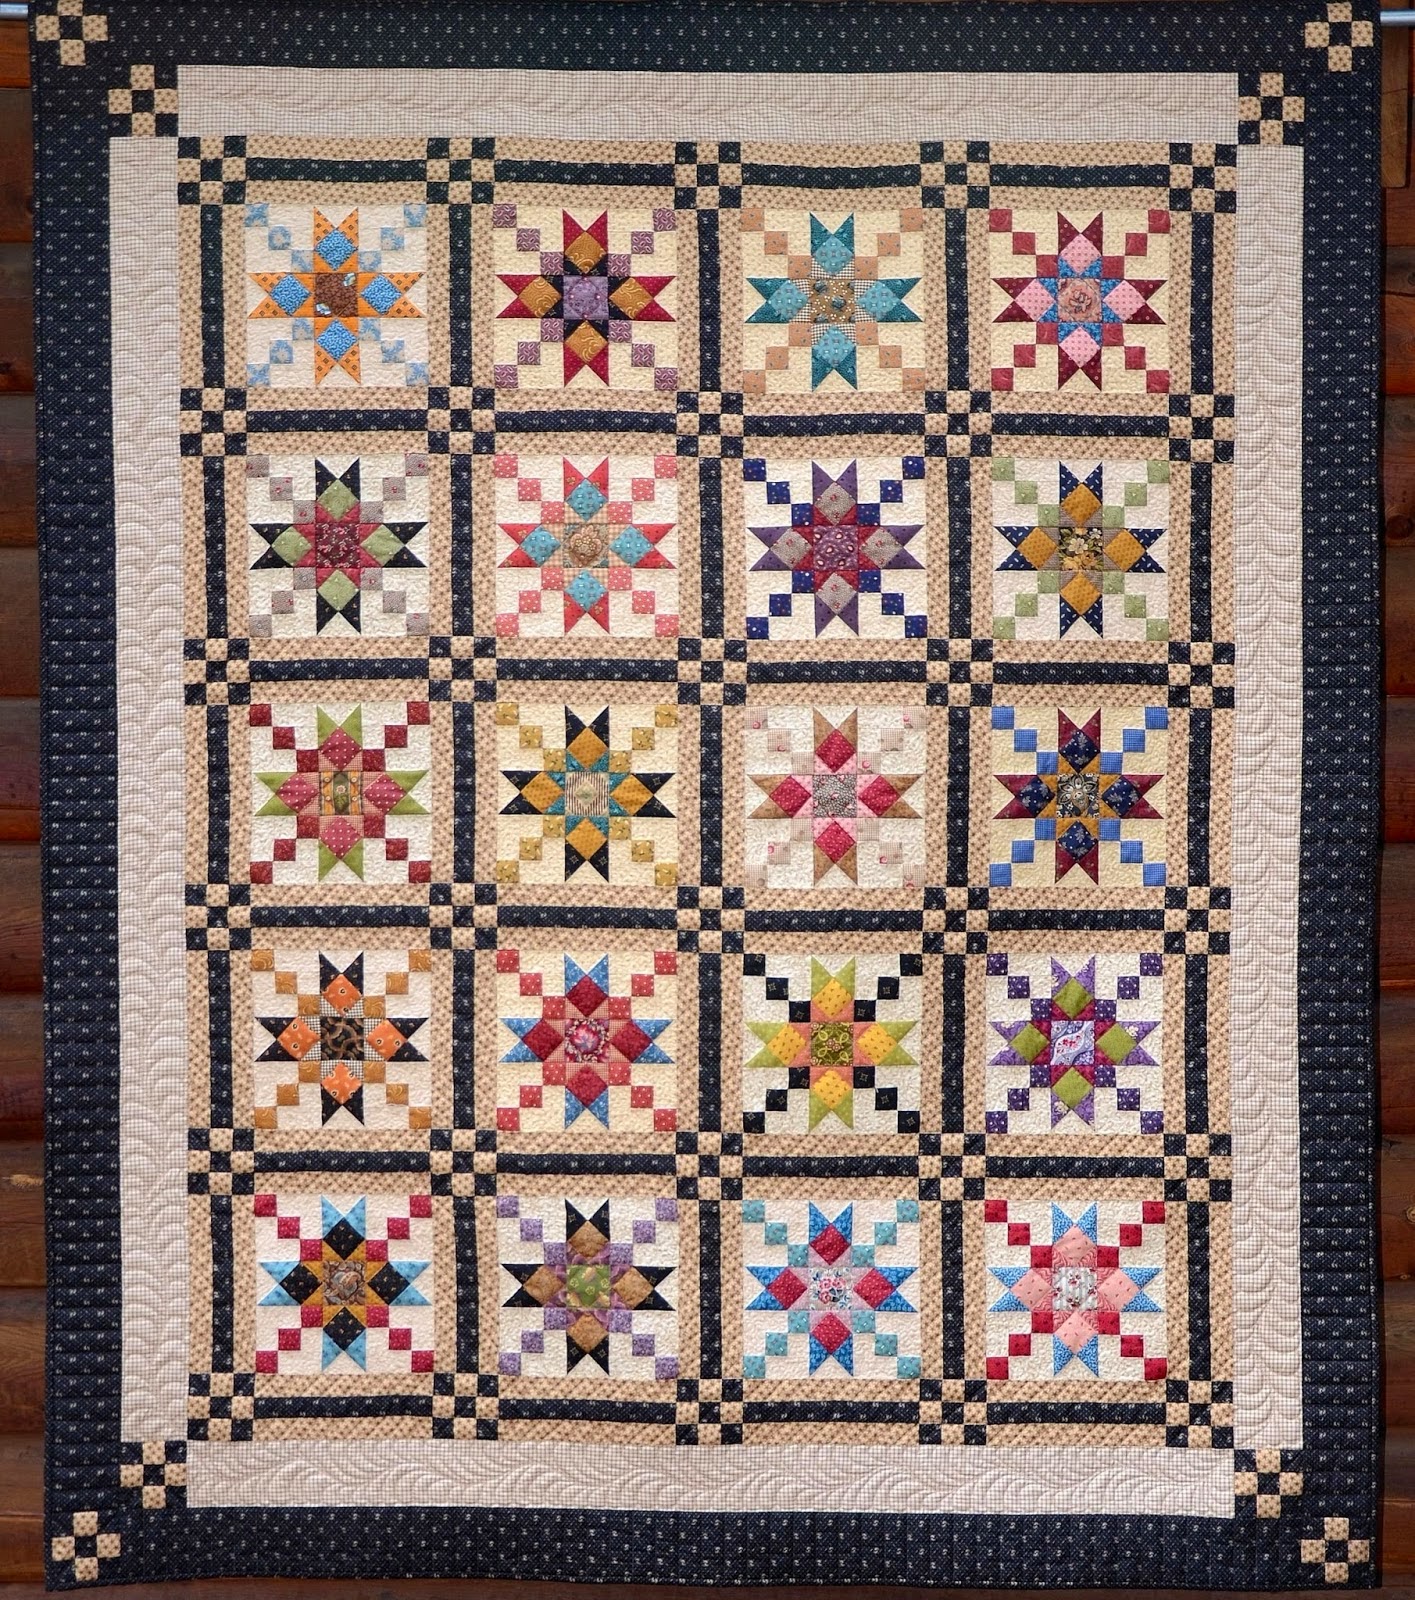 http://www.inbetweenstitches.com/shop/Patterns/p/Country-Charmer-x2497206.htm